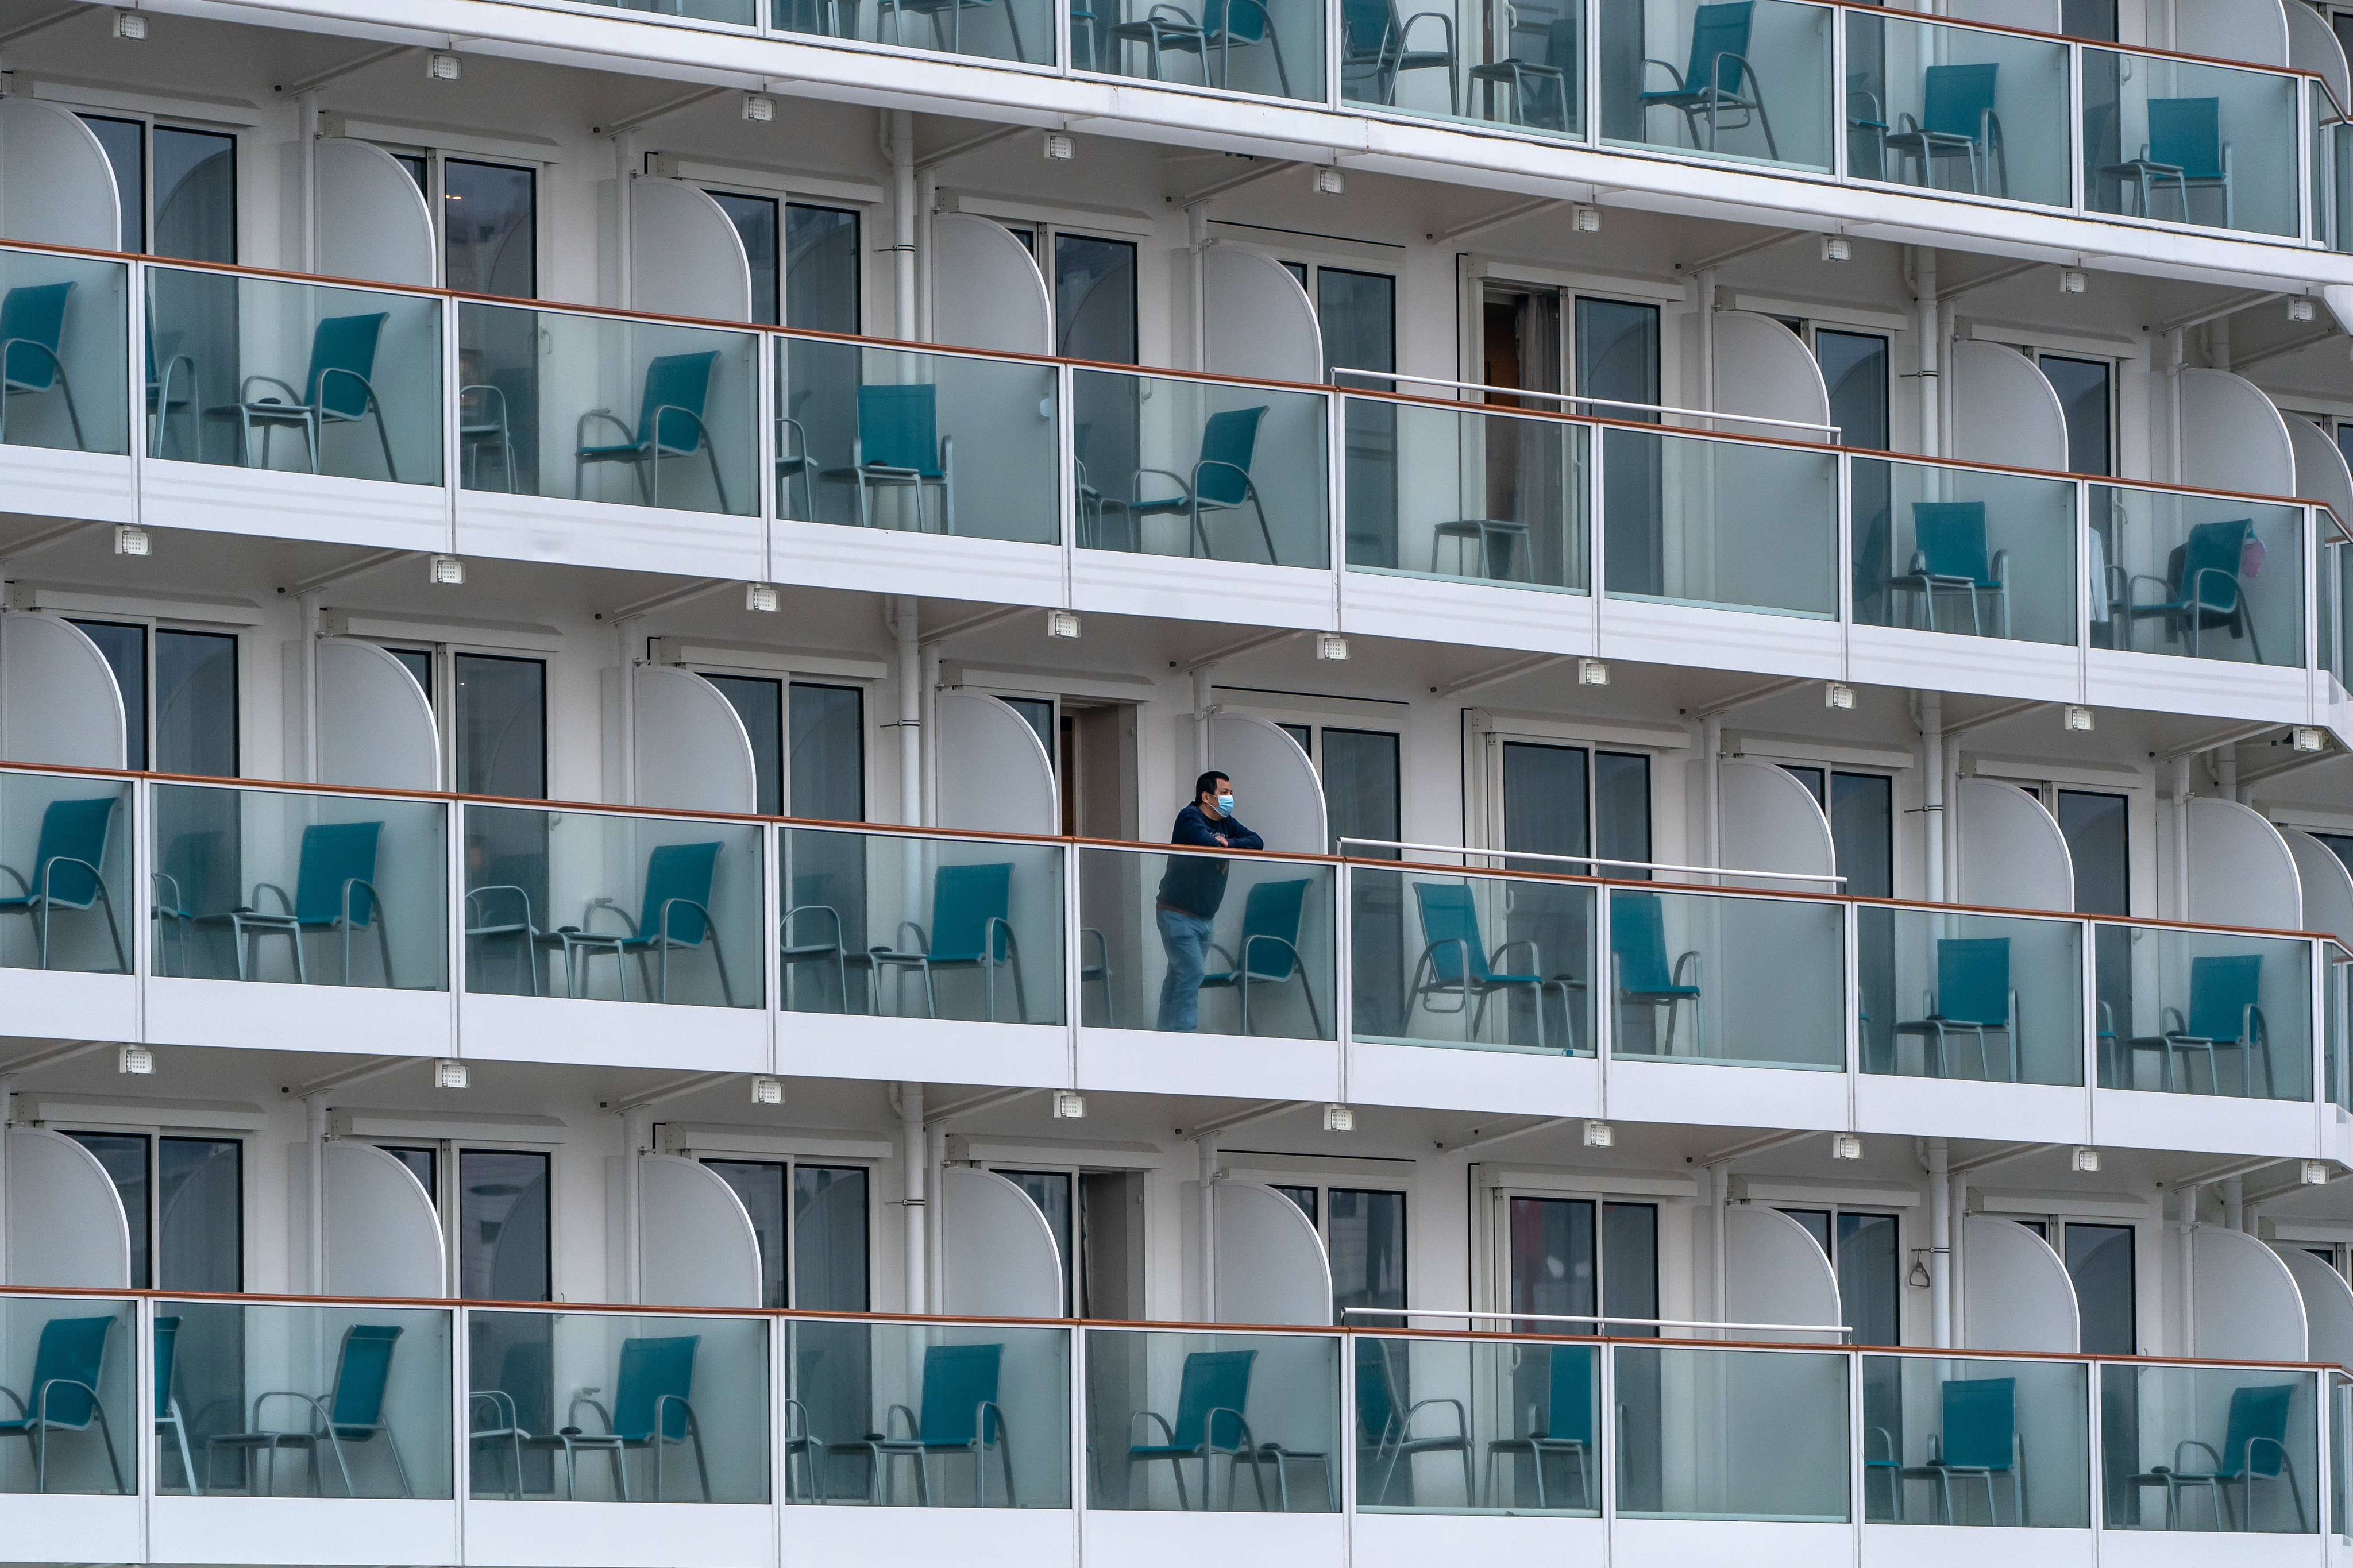 A passenger aboard The World Dream cruise ship as it sits moored in Hong Kong on February 5, 2020.